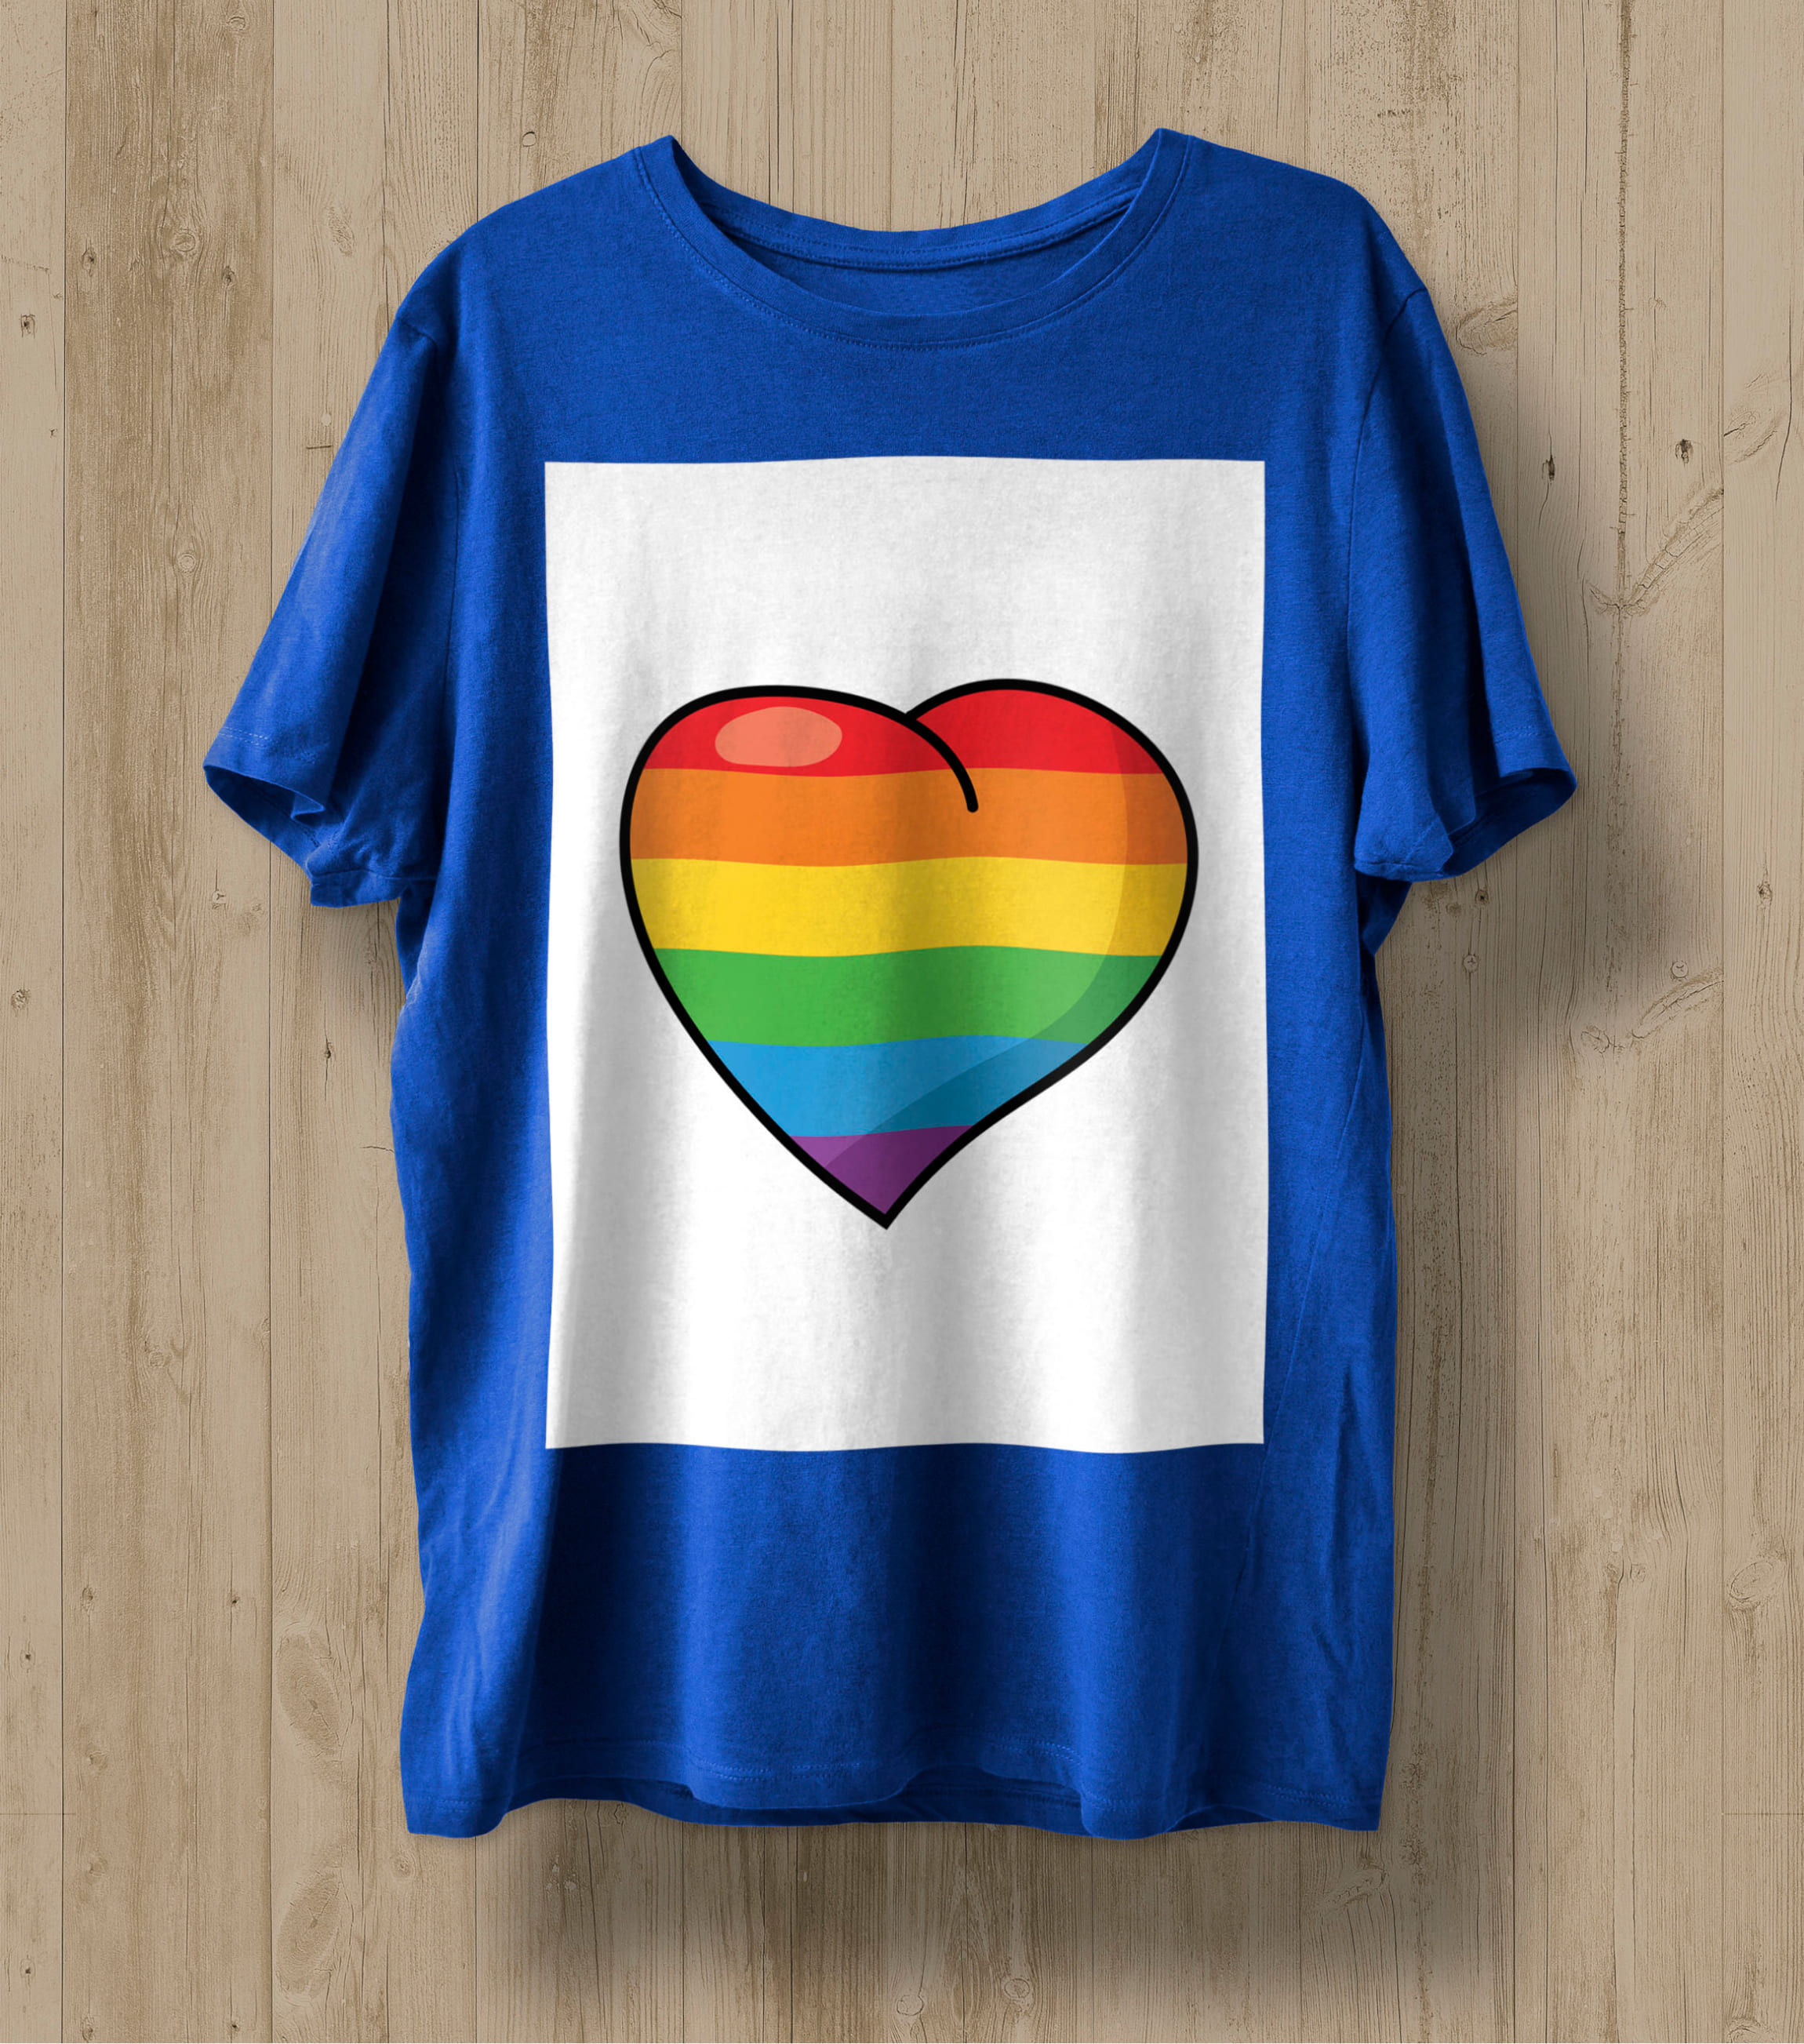 Blue t-shirt with a heart in the colors of the LGBT flag in a white rectangle.